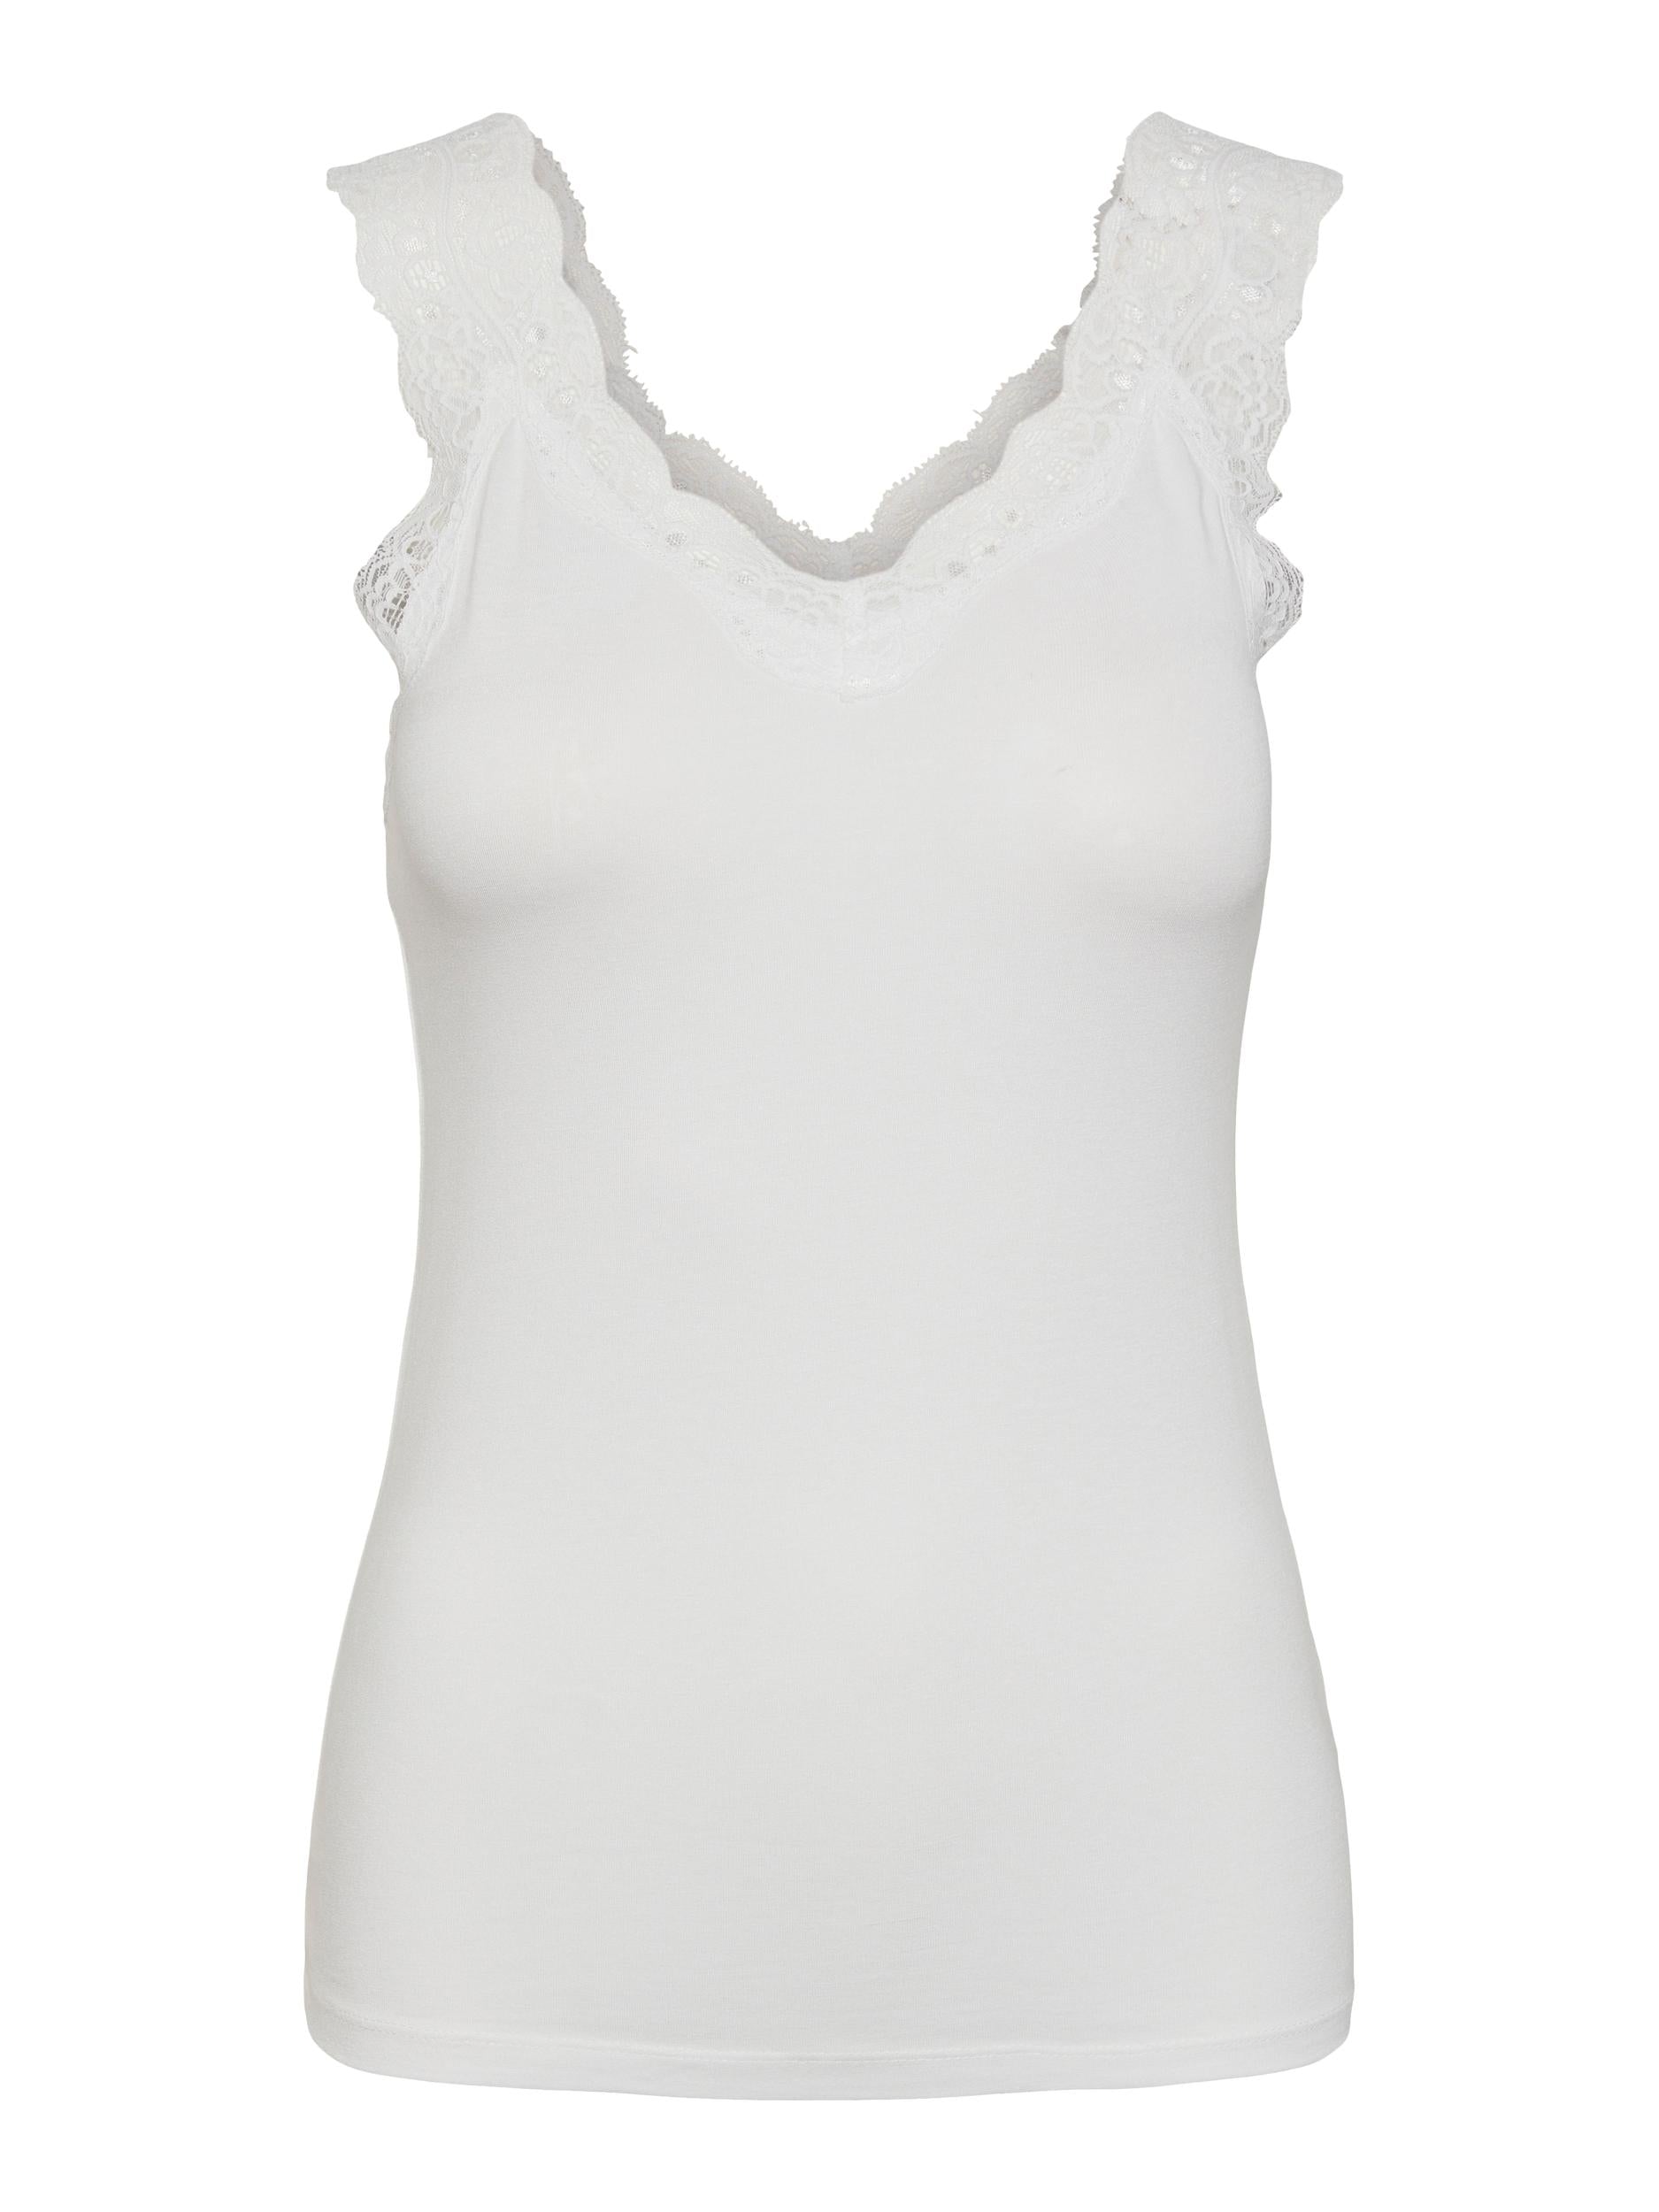 Pieces Barbera Lace Top - White